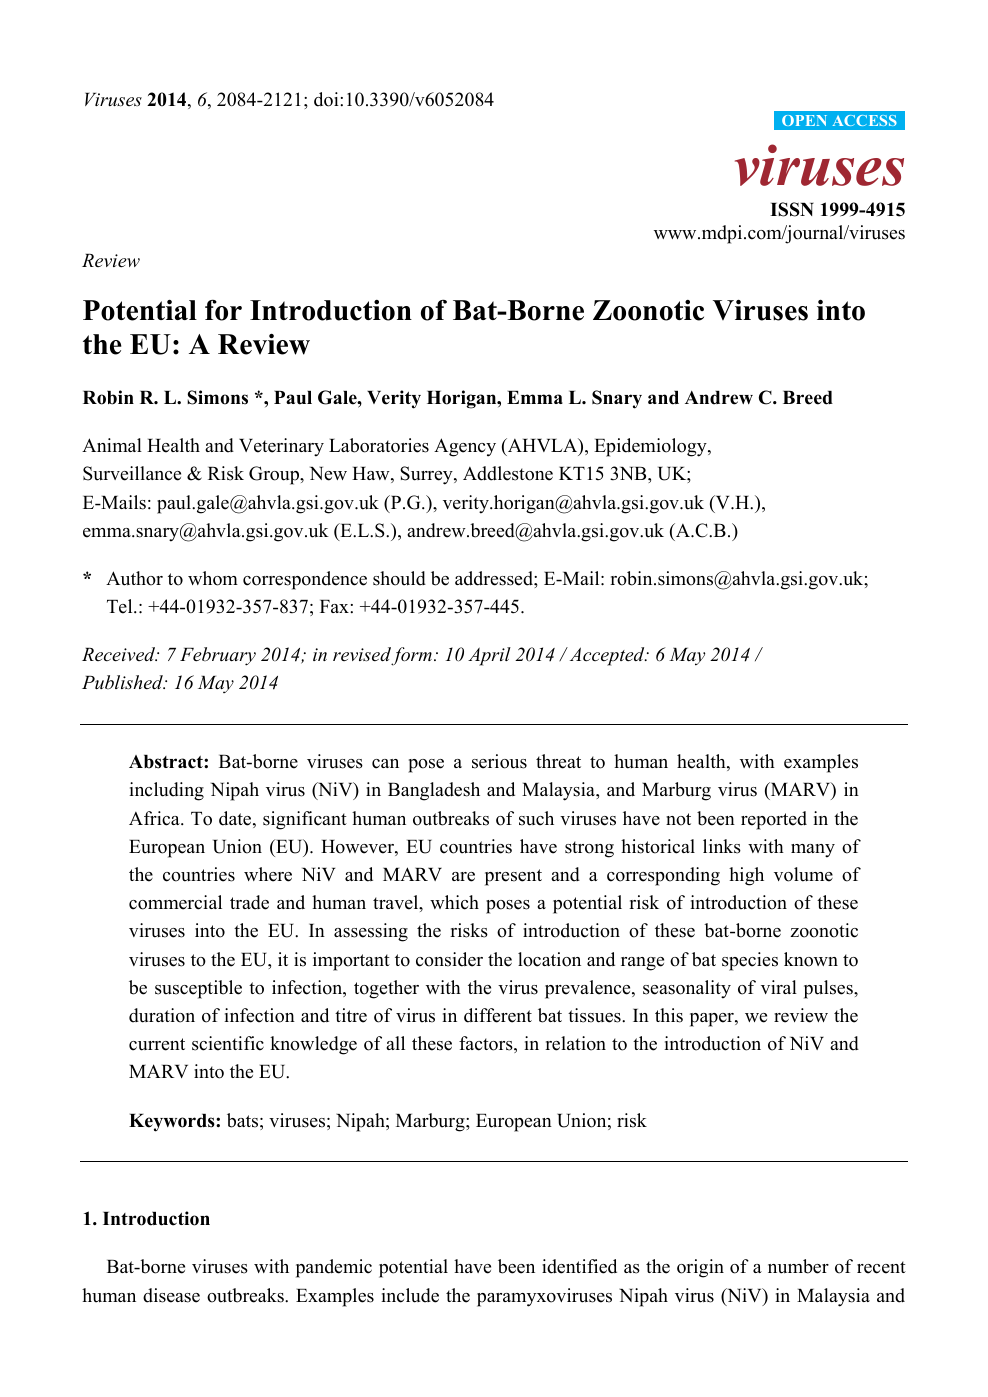 Potential For Introduction Of Bat Borne Zoonotic Viruses Into The Eu A Review Topic Of Research Paper In Biological Sciences Download Scholarly Article Pdf And Read For Free On Cyberleninka Open Science